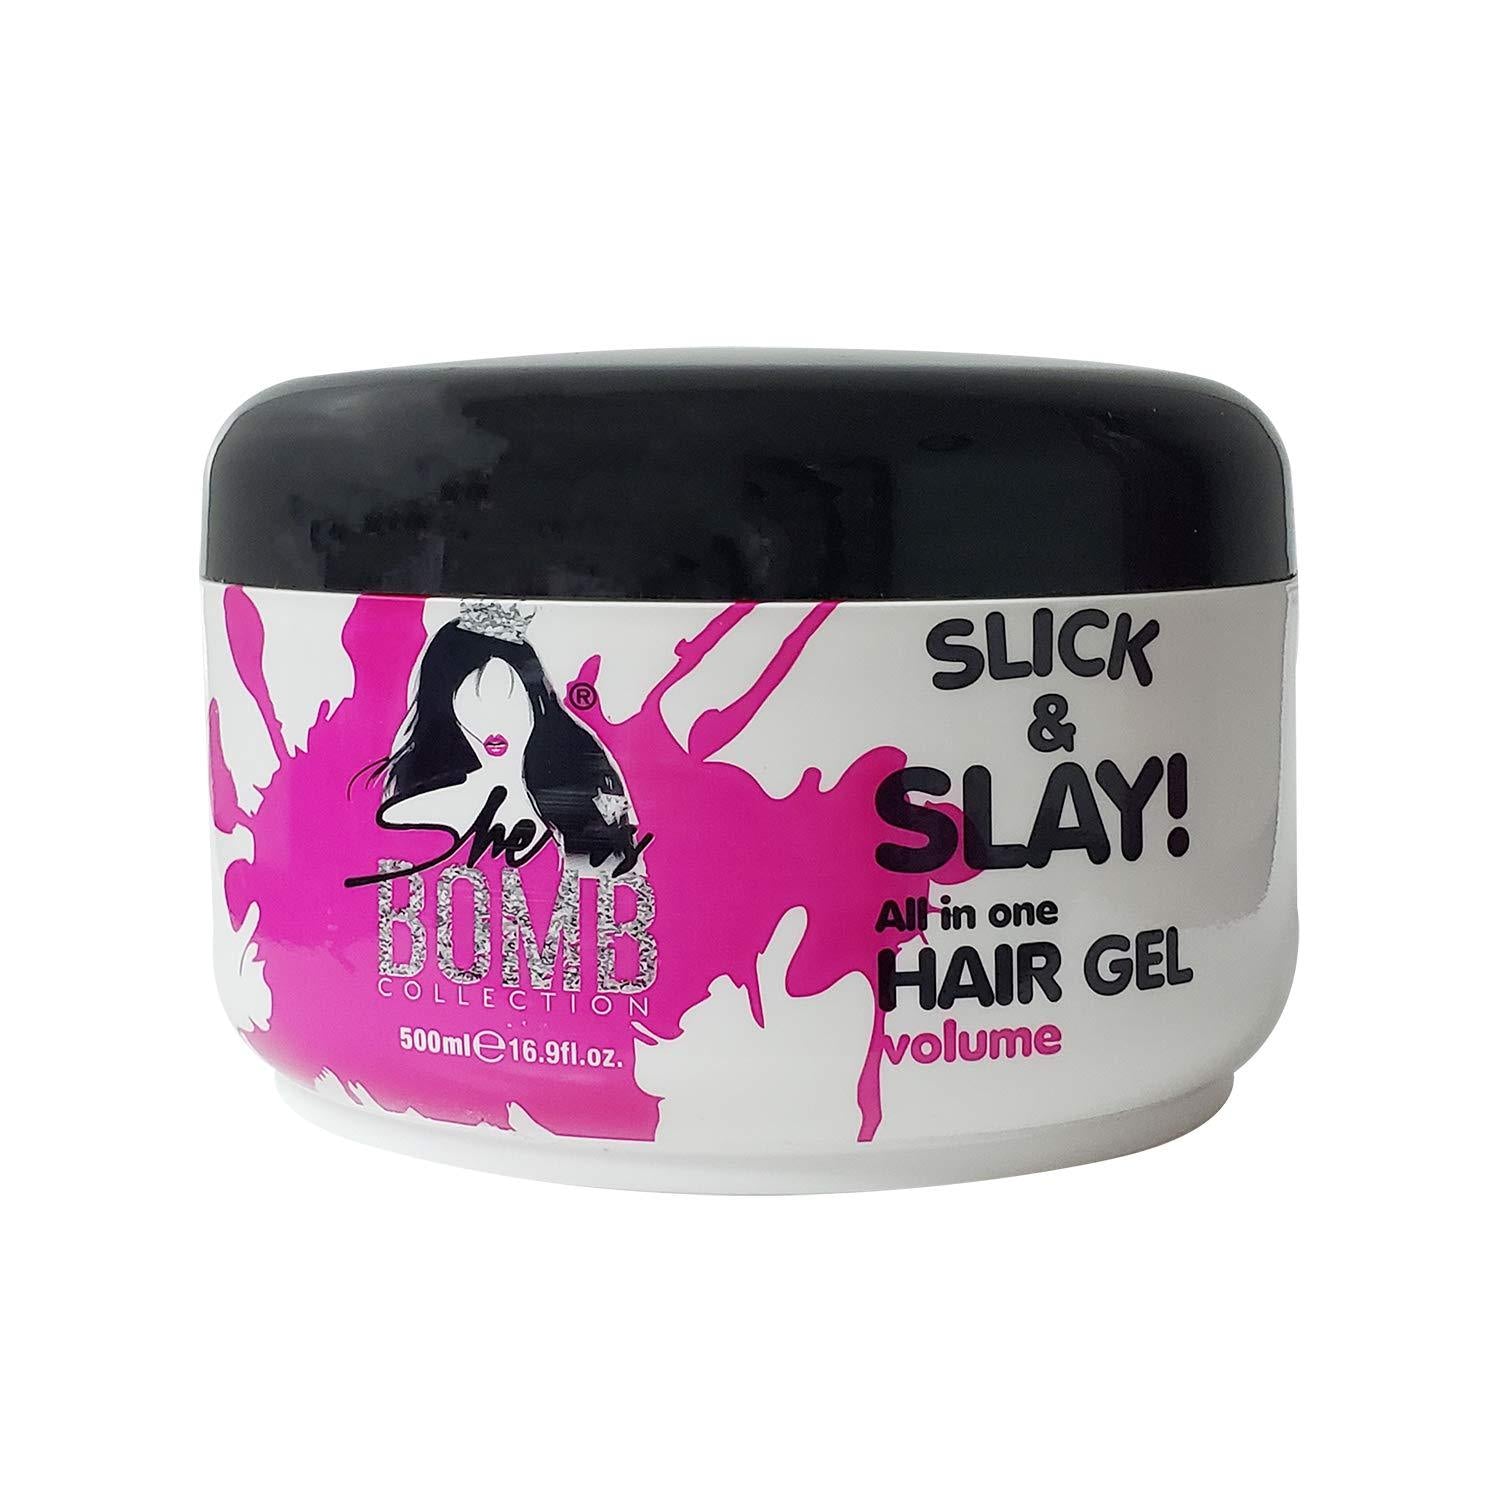 She is Bomb All In One Hair Gel